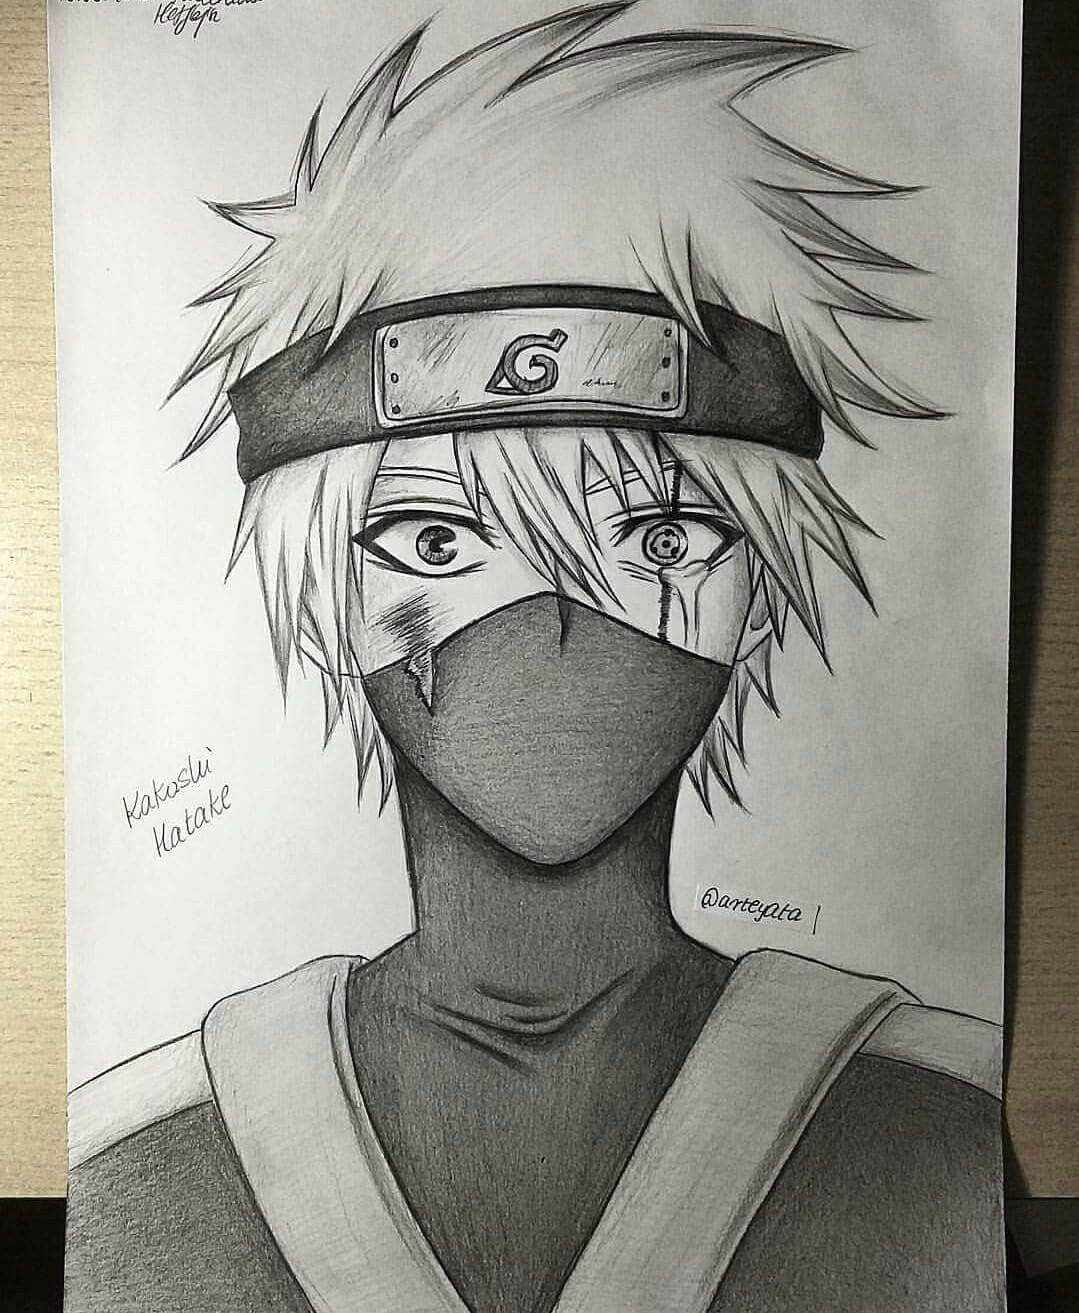 little kakashi hatake arteyata drawing a today 15th september is his birthday a a a i